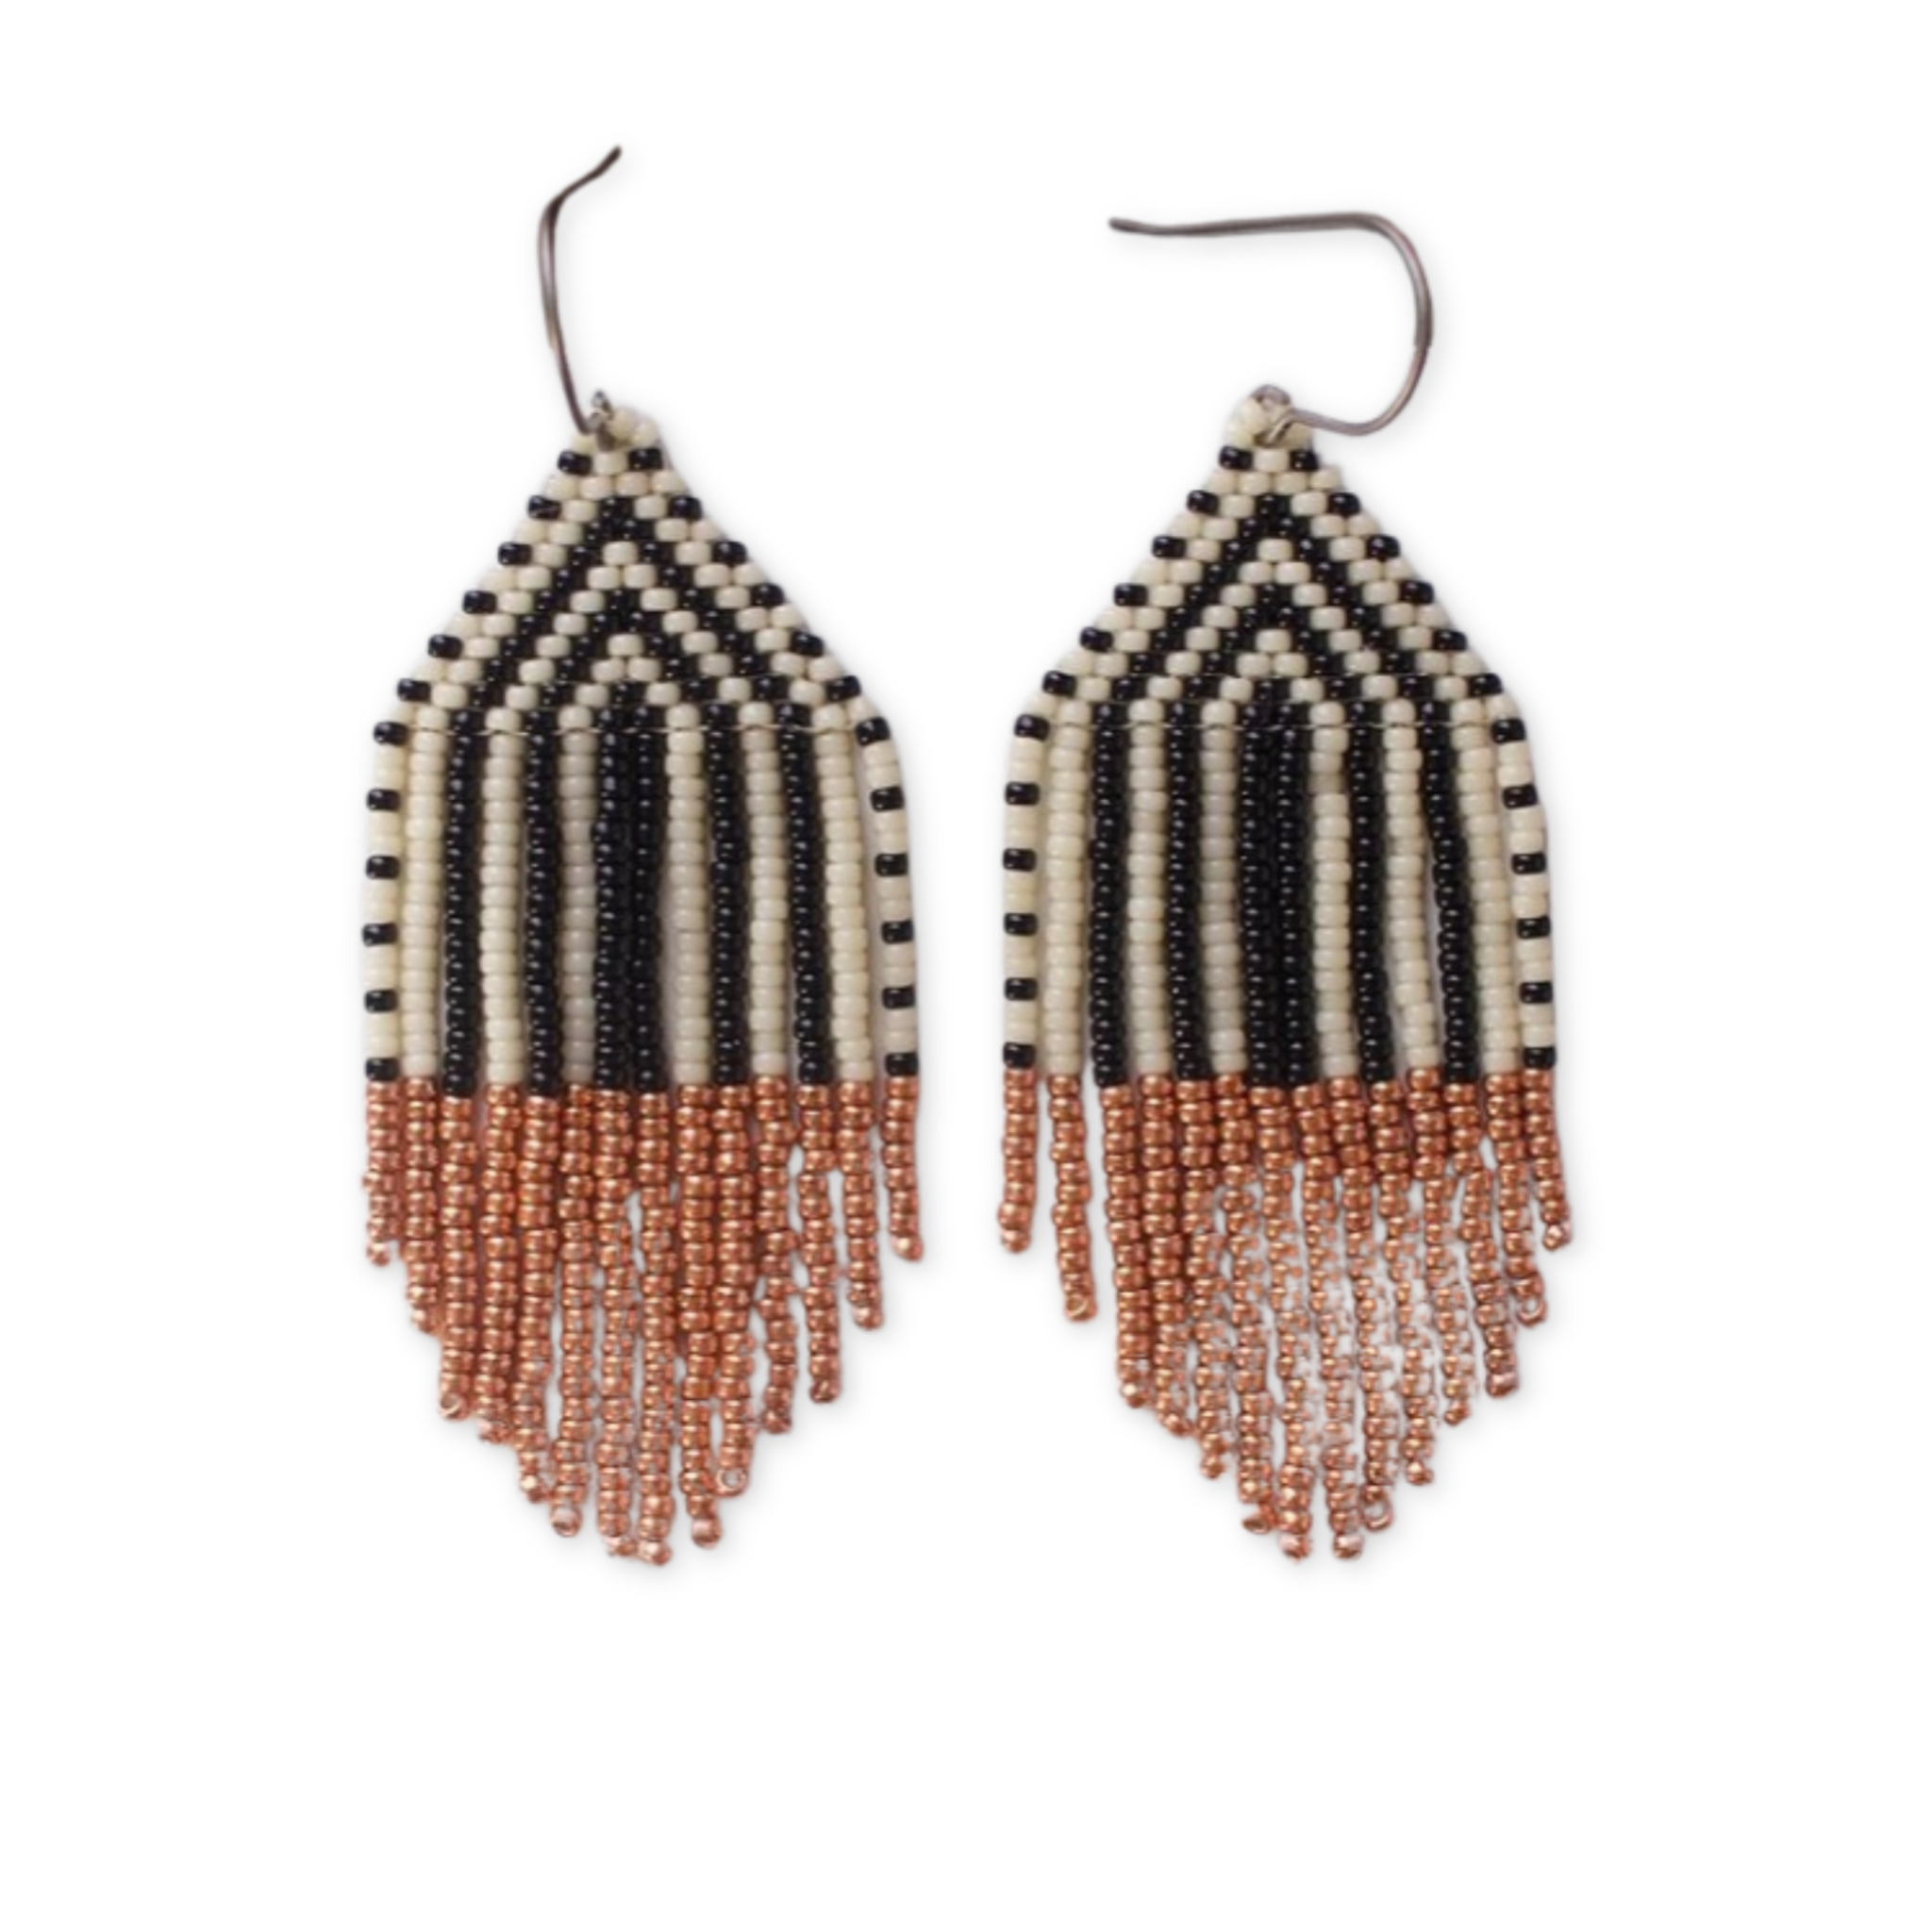 black and white hand beaded earrings with copper fringe